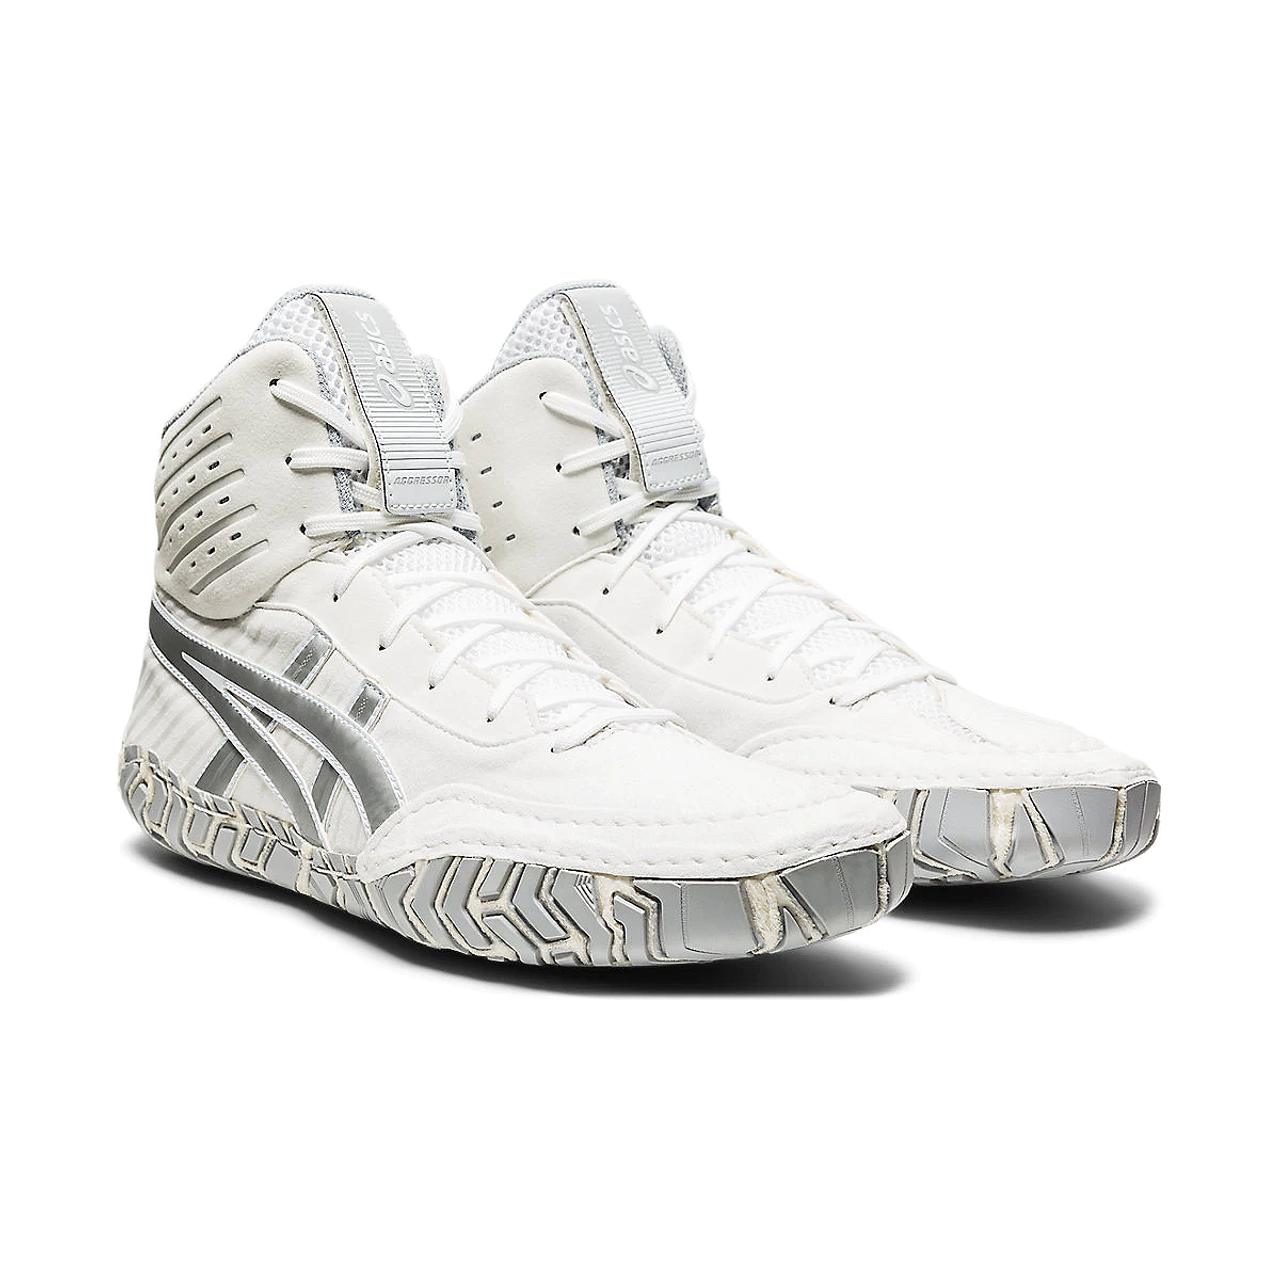 Asics Aggressor 4 Adult Wrestling Shoes - White/Silver